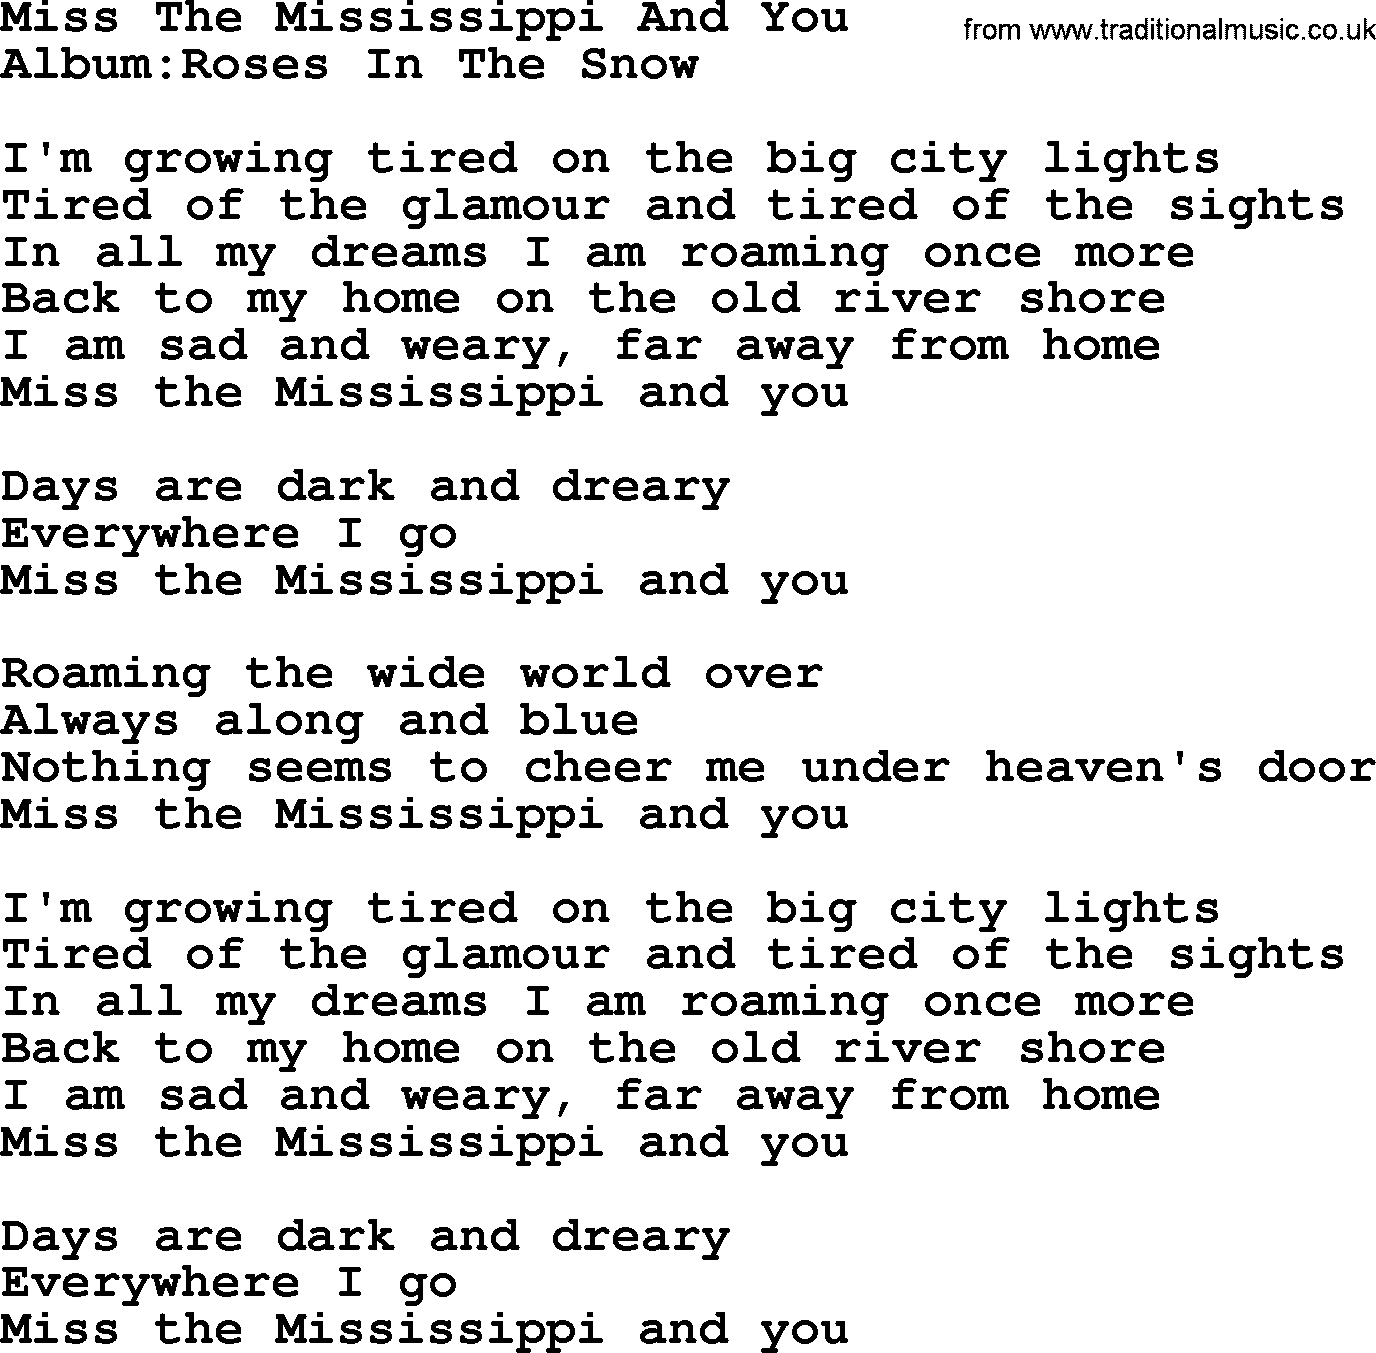 Emmylou Harris song: Miss The Mississippi And You lyrics